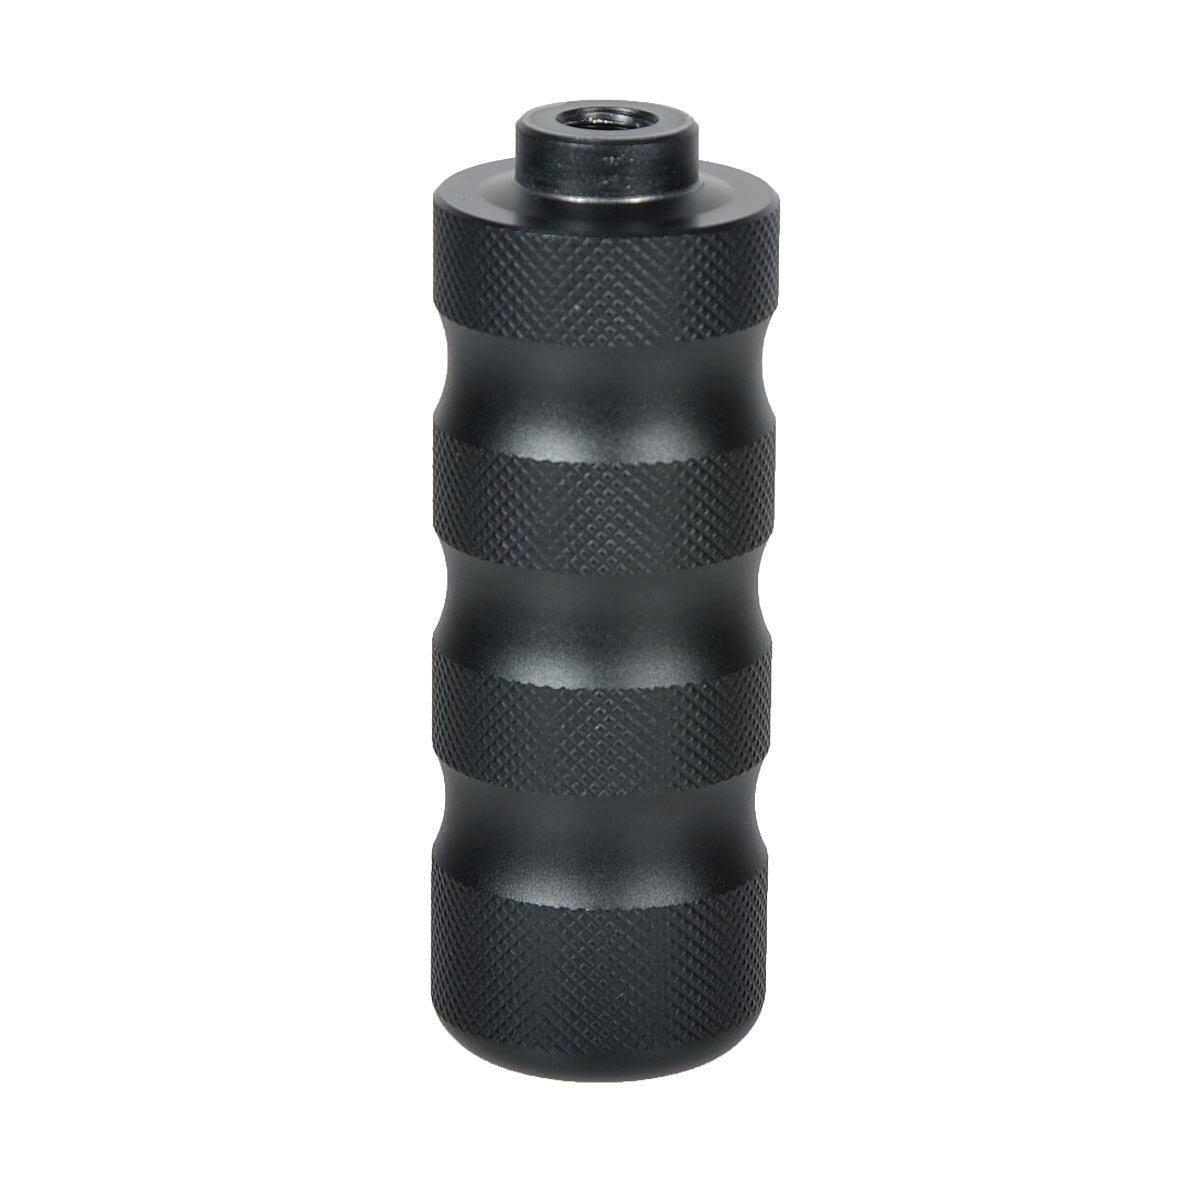 Bipod Vertical Grip Attachment for our CNC QD Model Bipods Bipods &amp; Monopods Green Blob Outdoors 